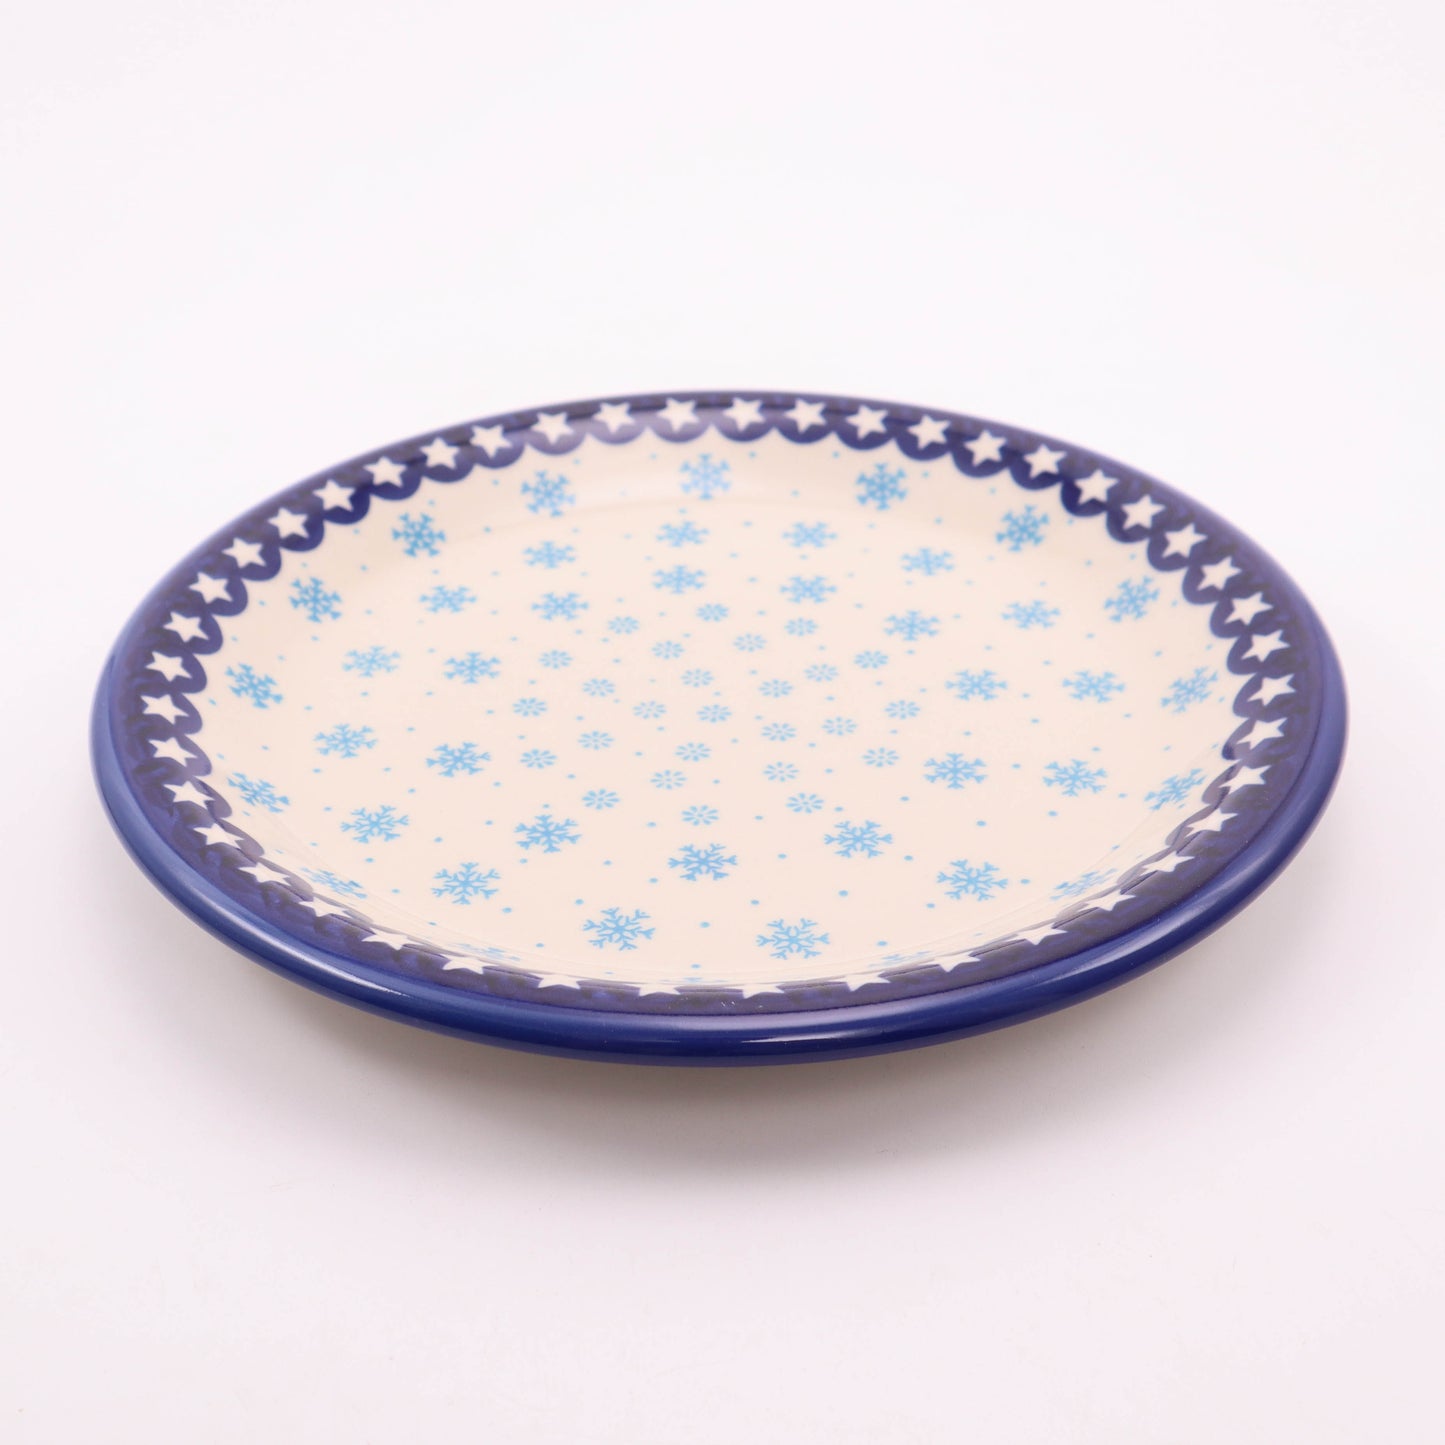 10" Dinner Plate. Pattern: Frosted Flakes